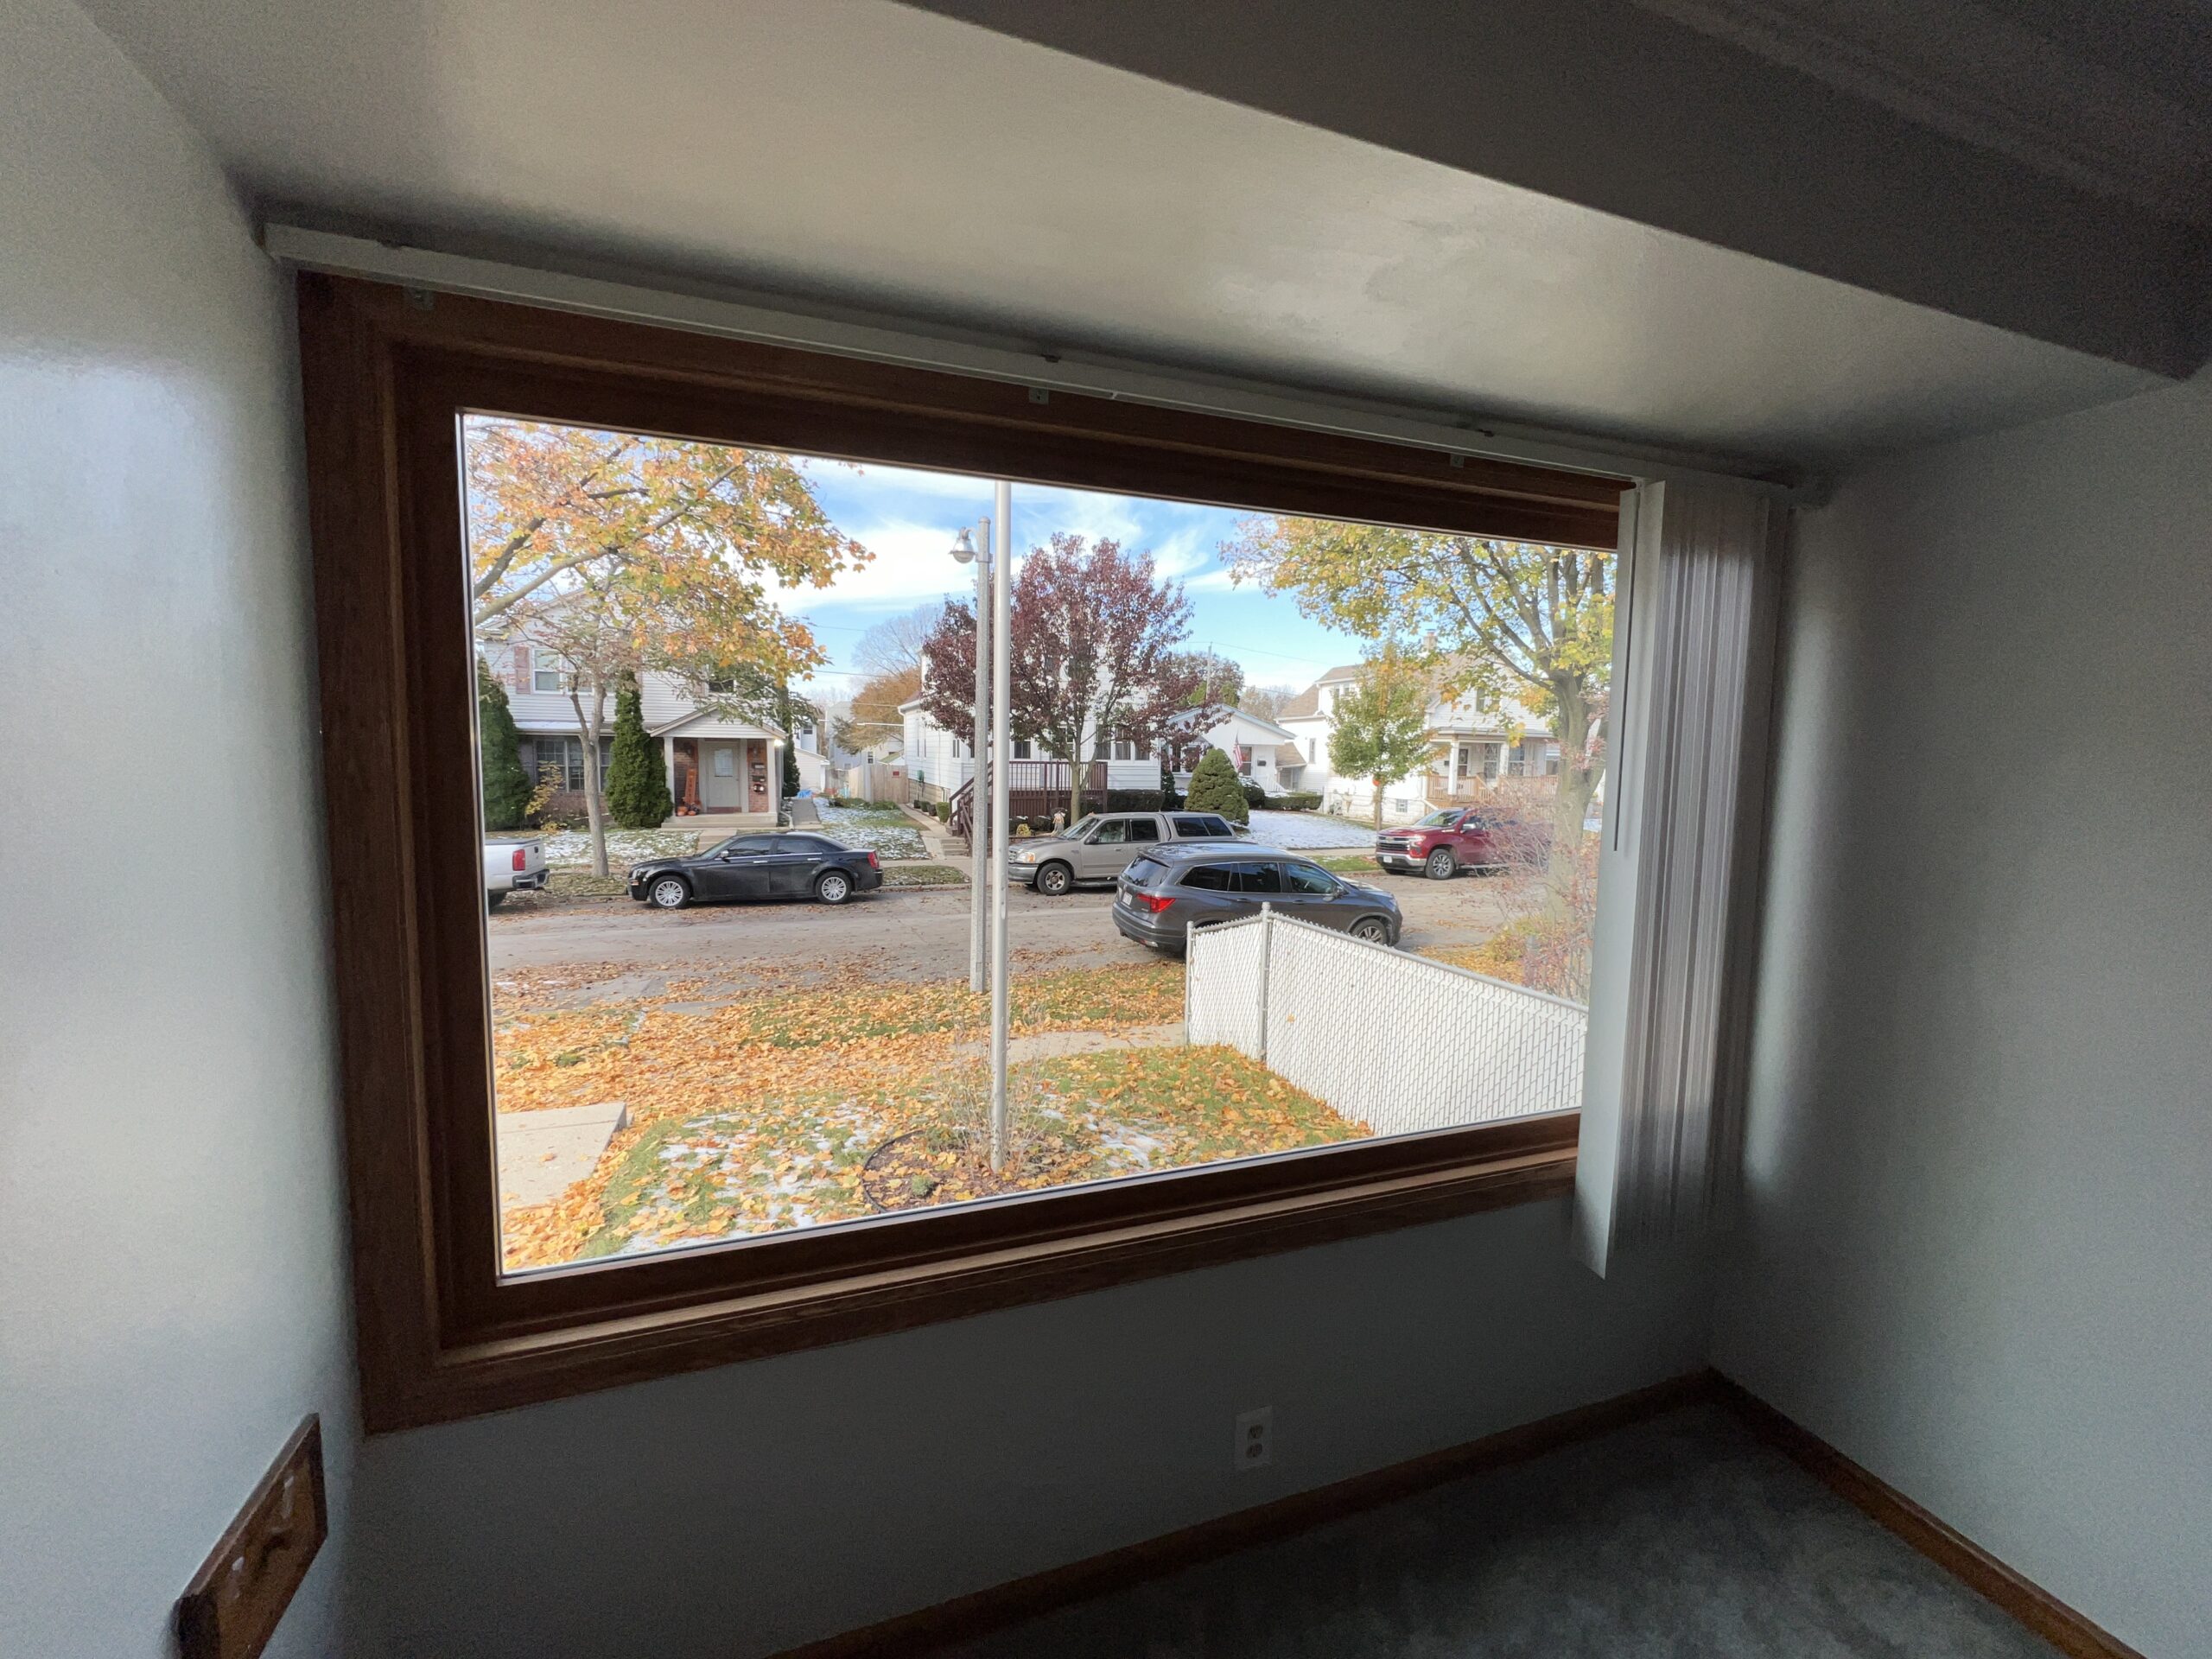 Large picture window looking at street